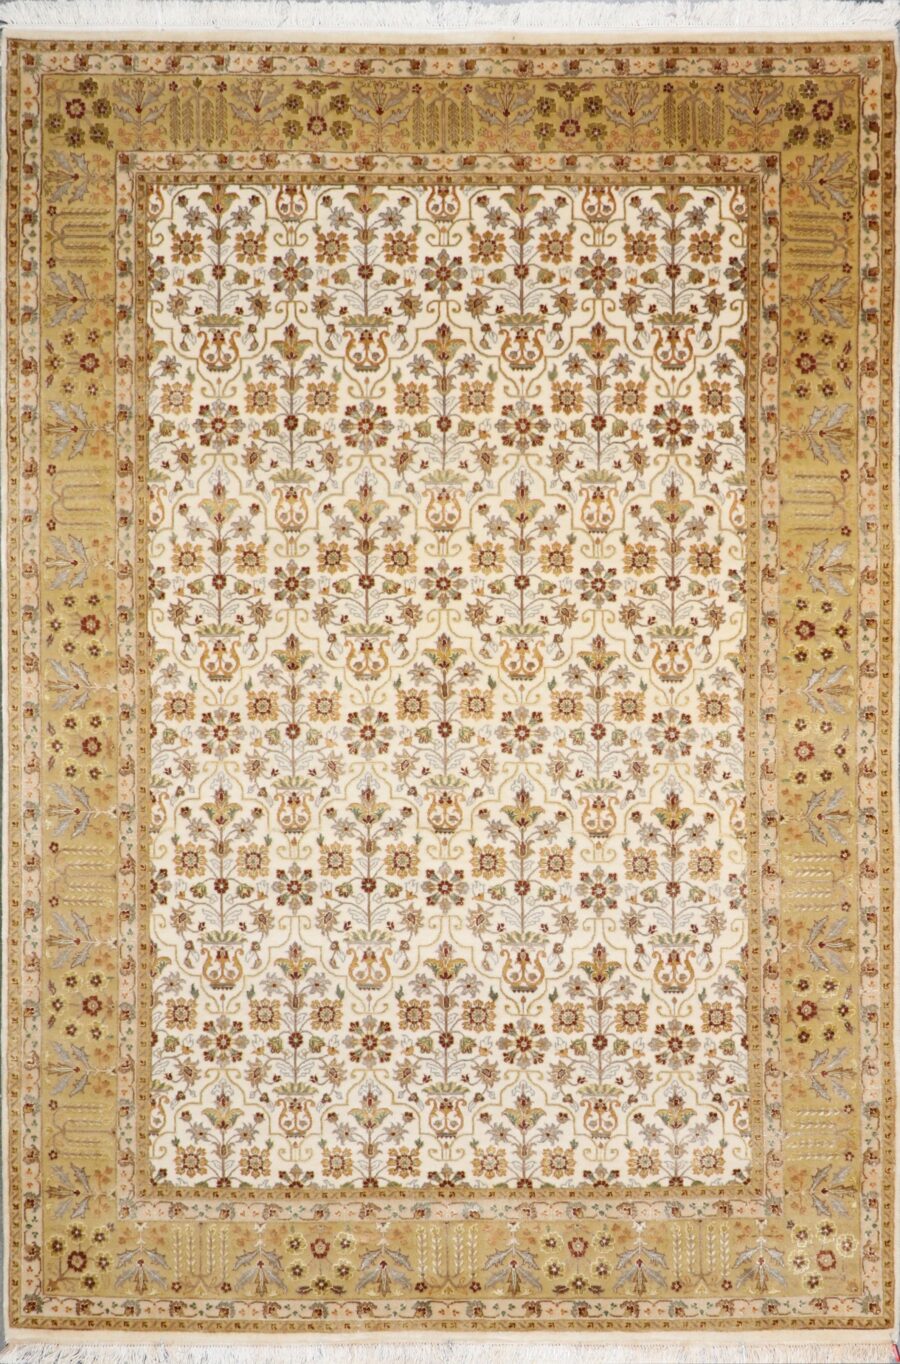 5'7"x8'4" Decorative Ivory Bejar Wool & Silk Hand-Knotted Rug - Direct Rug Import | Rugs in Chicago, Indiana,South Bend,Granger